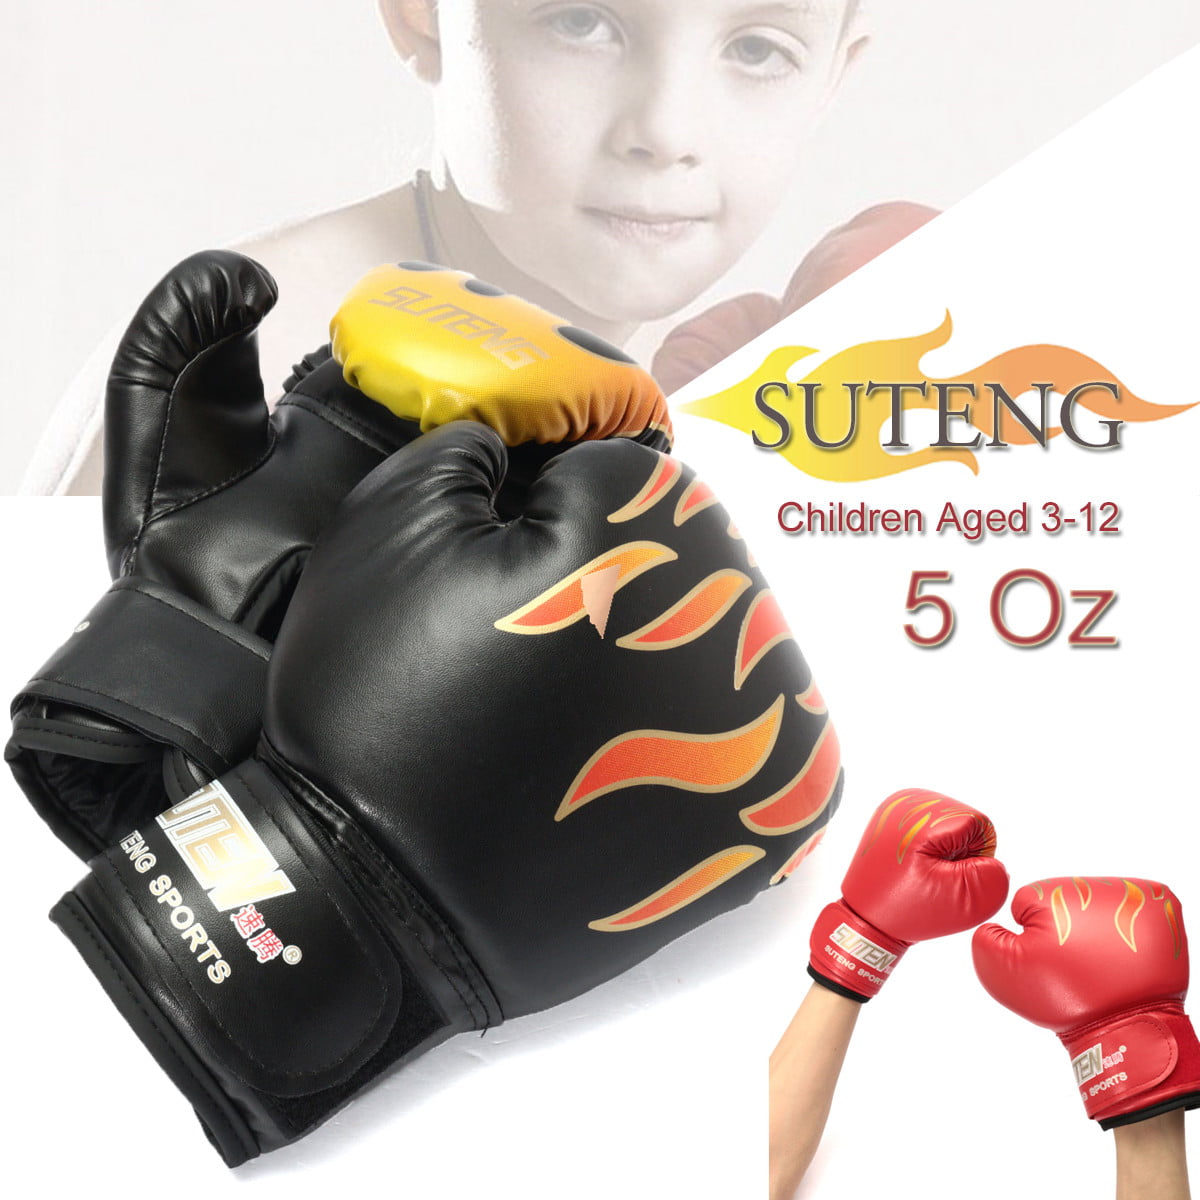 6oz Kids Boxing Bag Gloves MMA Muay Thai Junior Punch Sparring Mitts Boys Boxing 